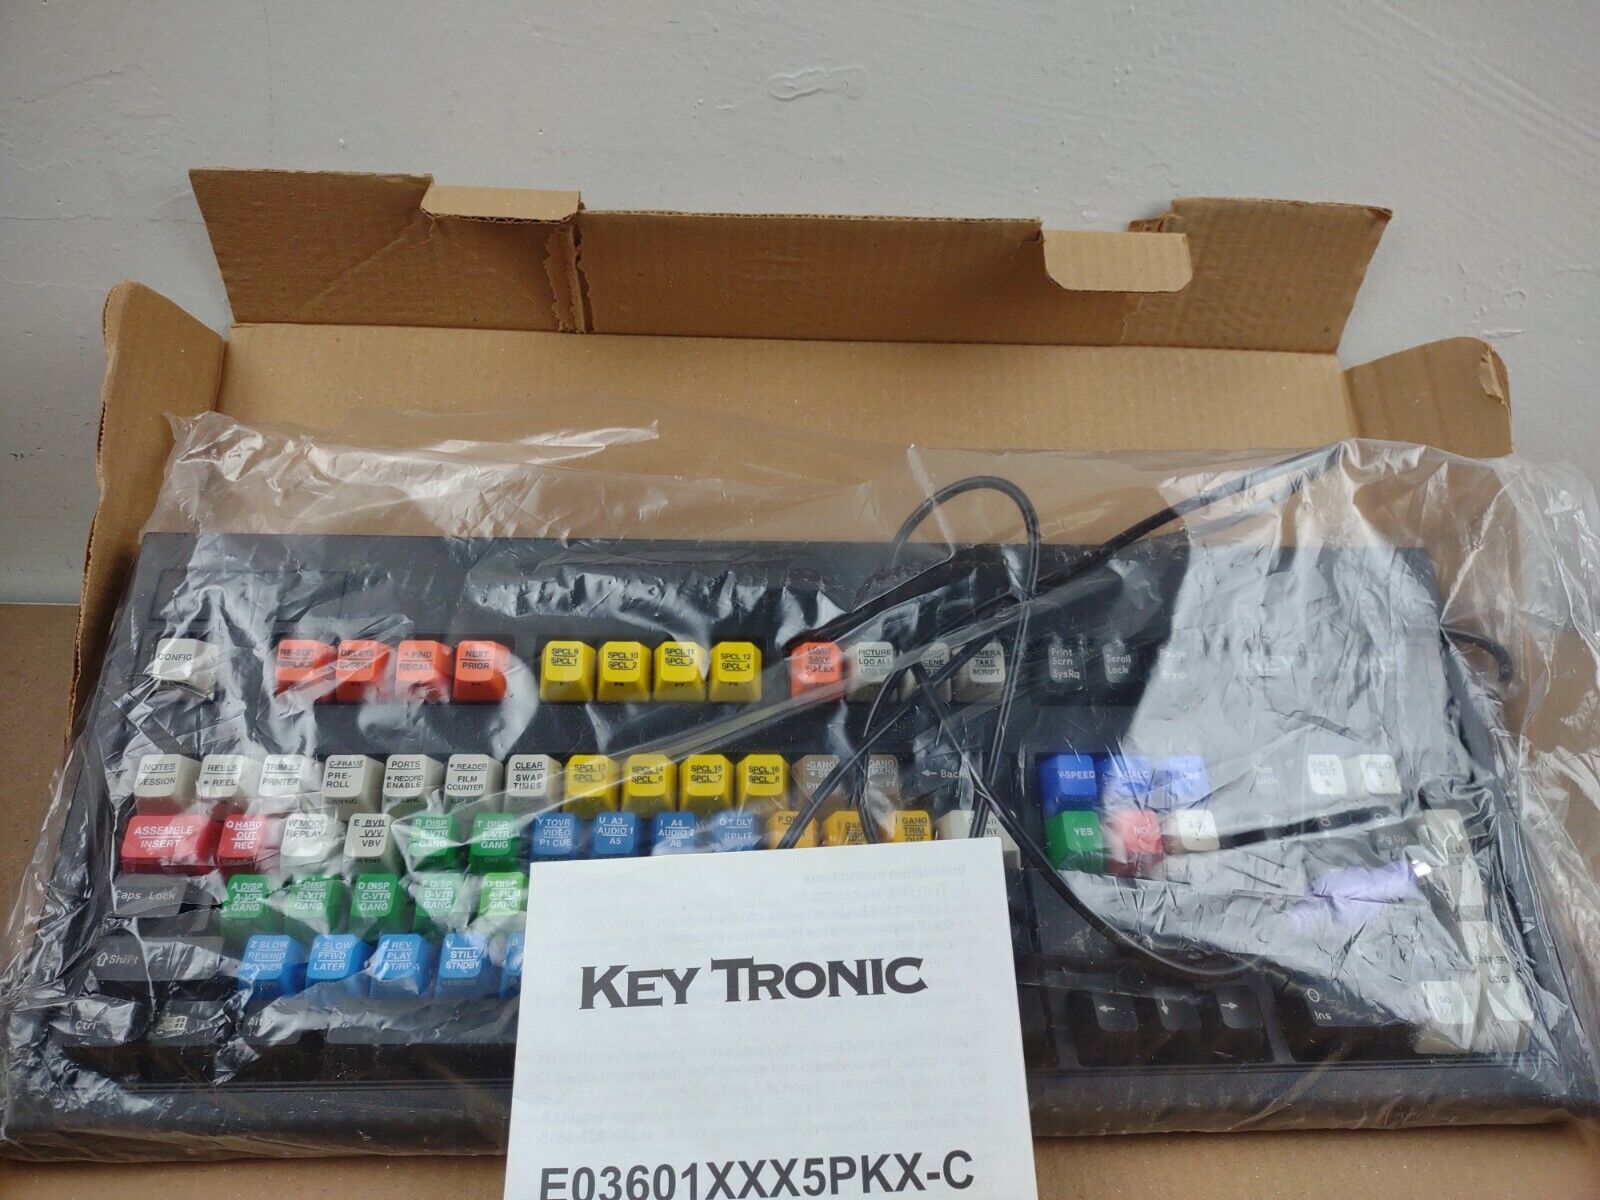 Keytronic E03601PS25PKB-C Wired Keyboard 